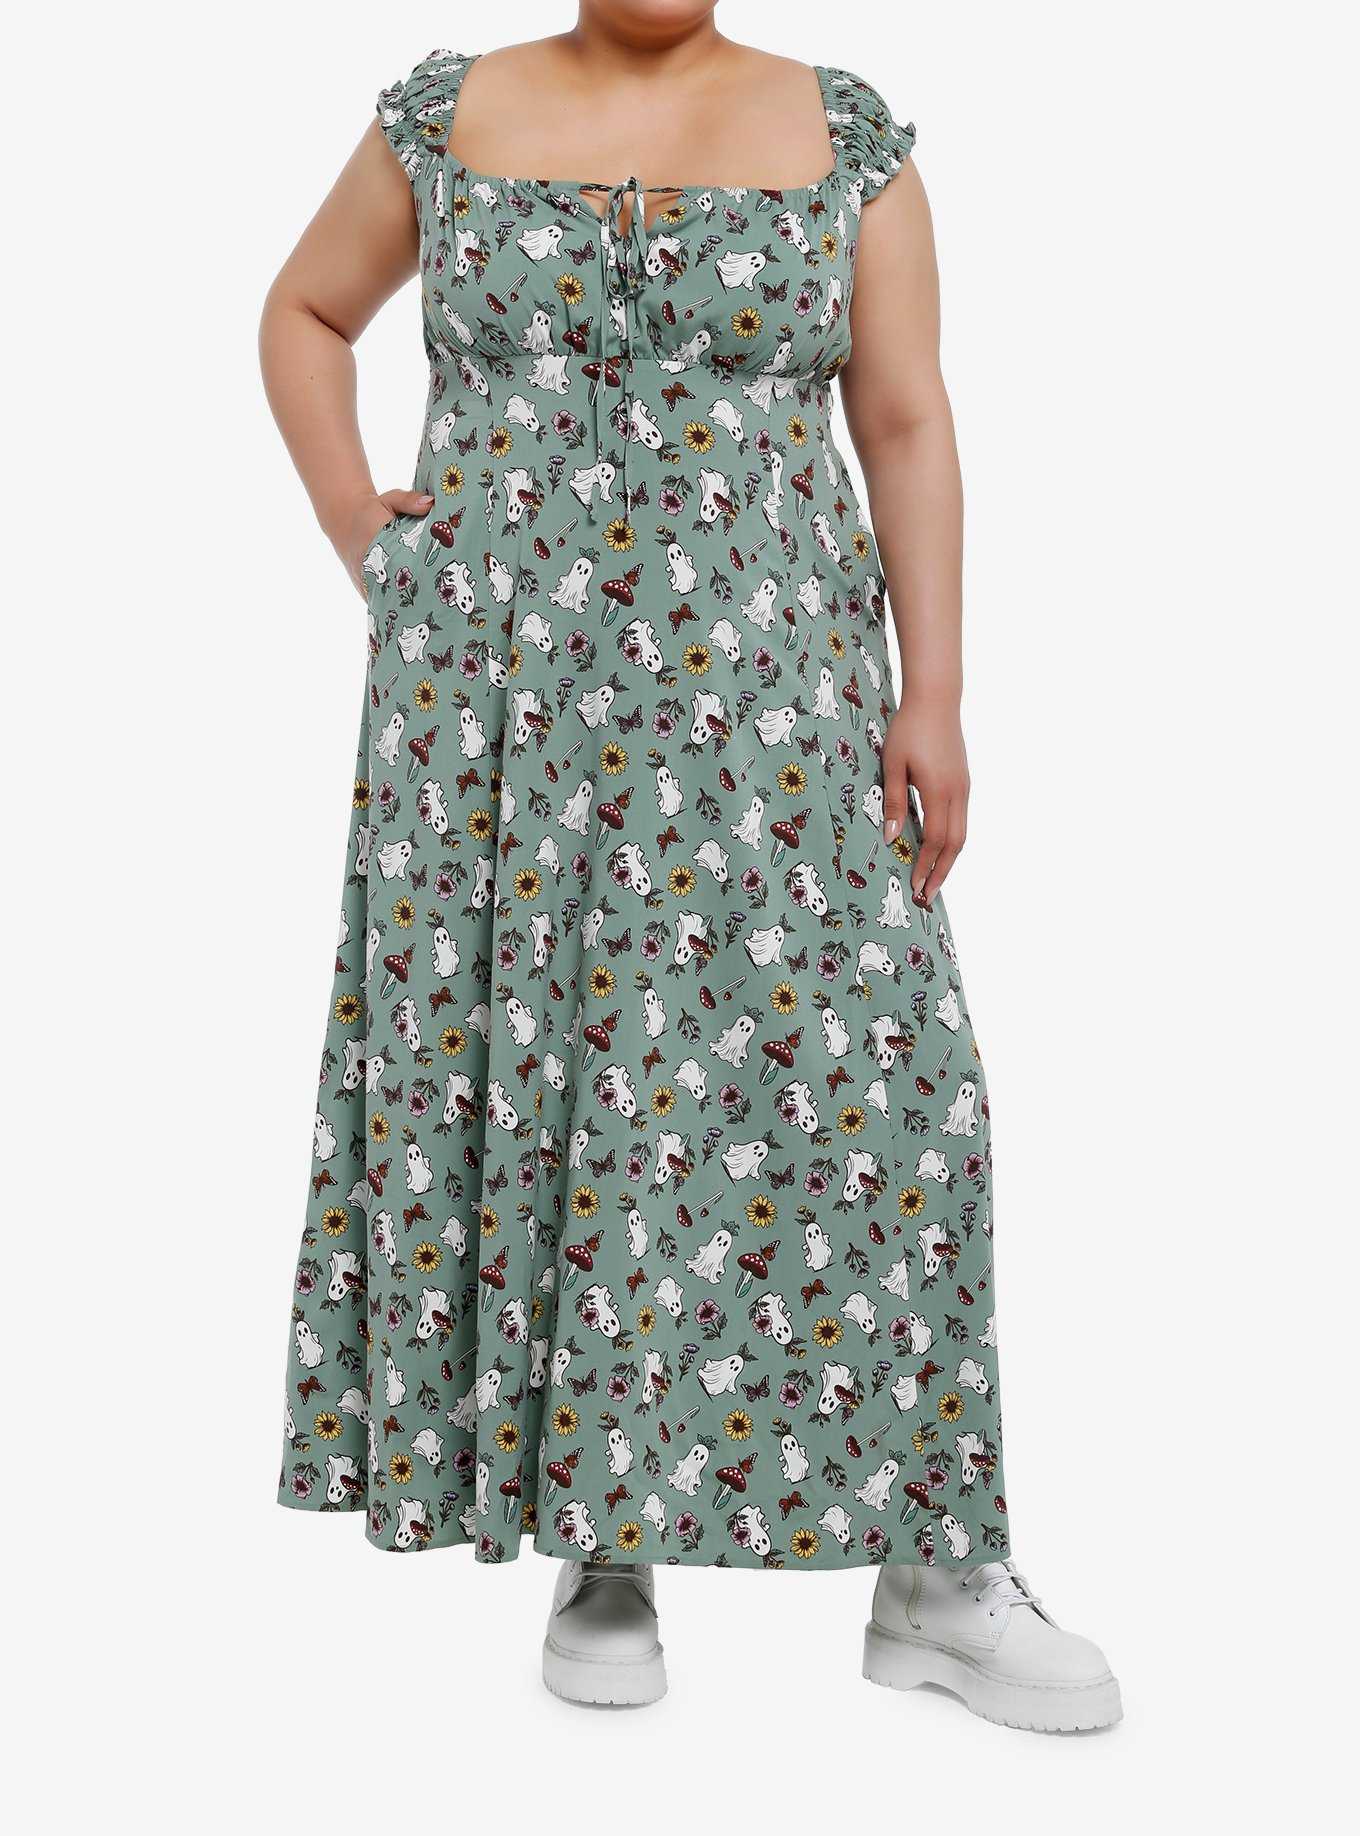 Thorn & Fable Mushroom Ghost Empire Maxi Dress Plus Size, , hi-res